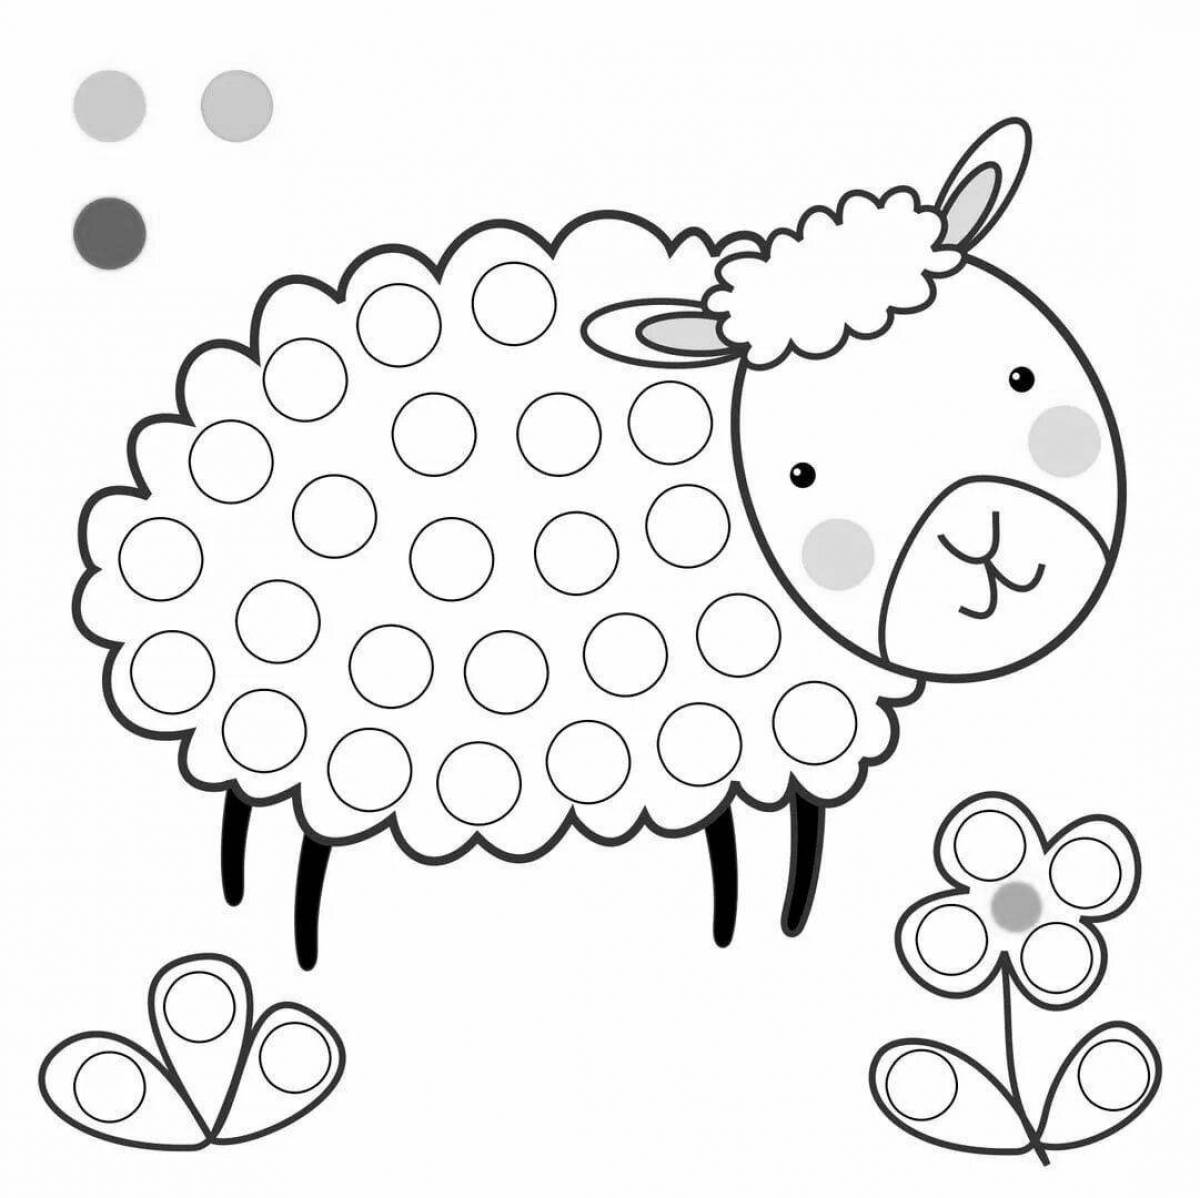 Color finger coloring page for 4-5 year olds